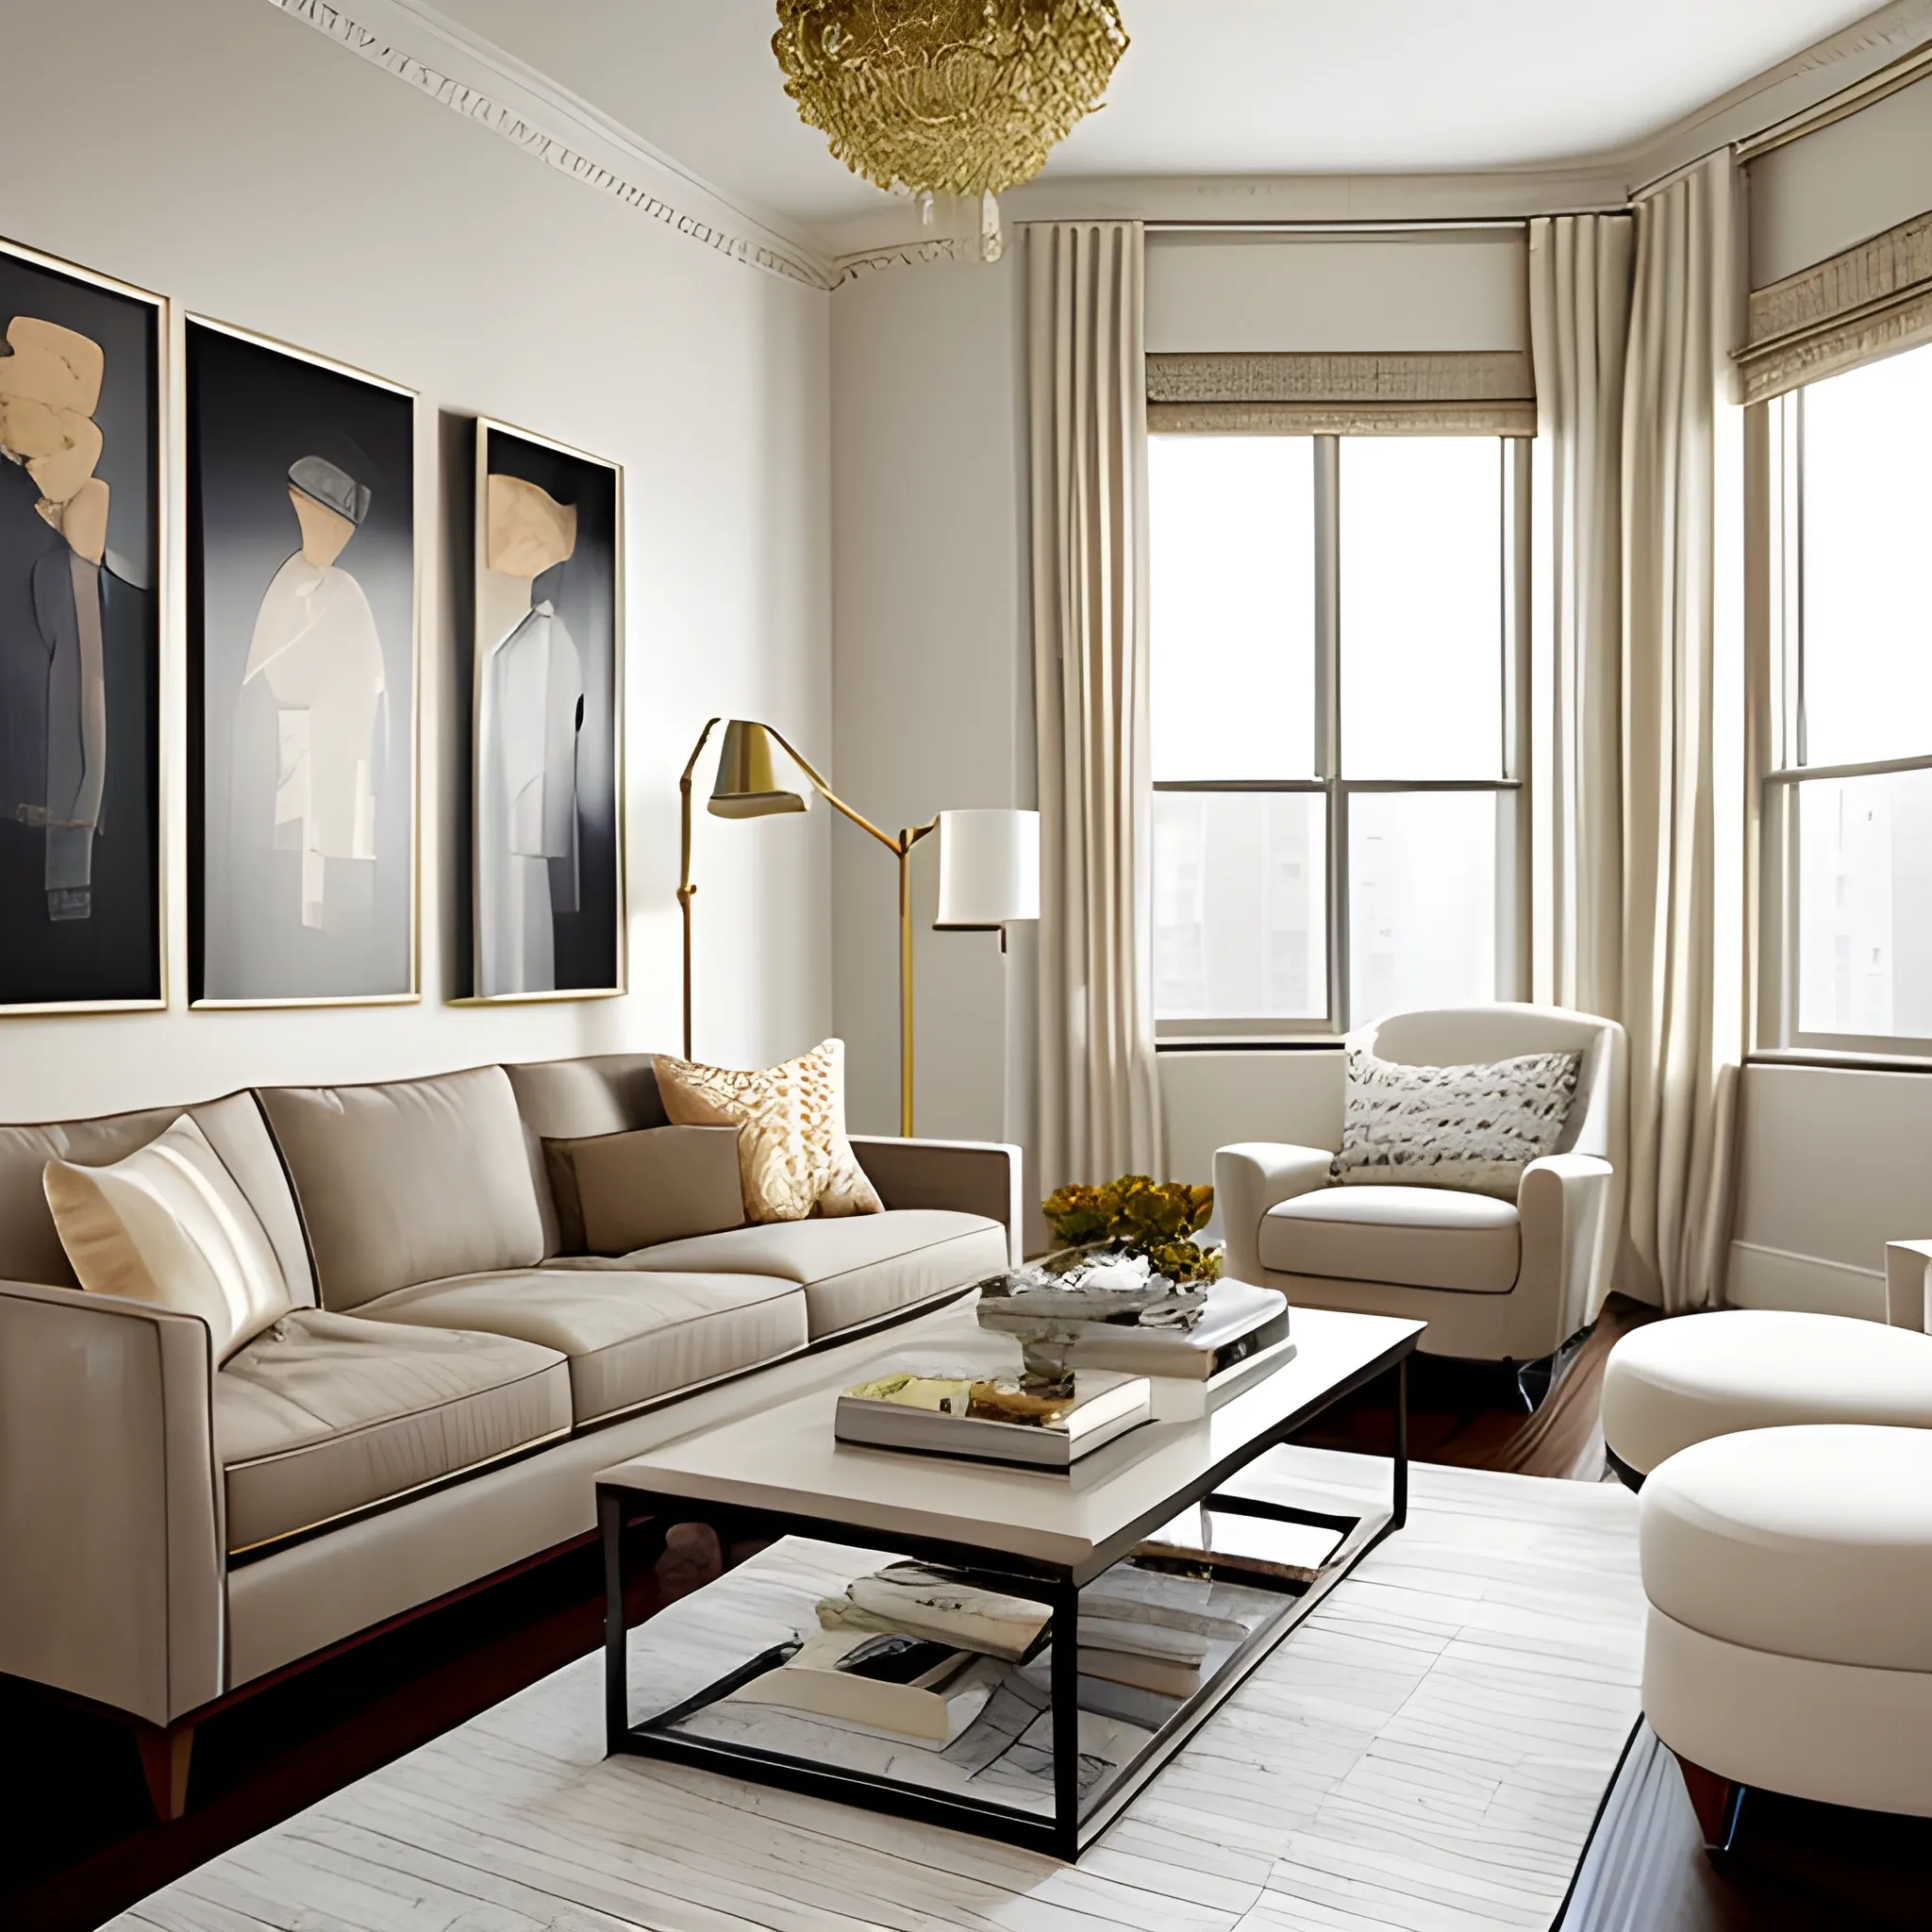 apartment designed by nate berkus, muted neutral colors - Arthub.ai